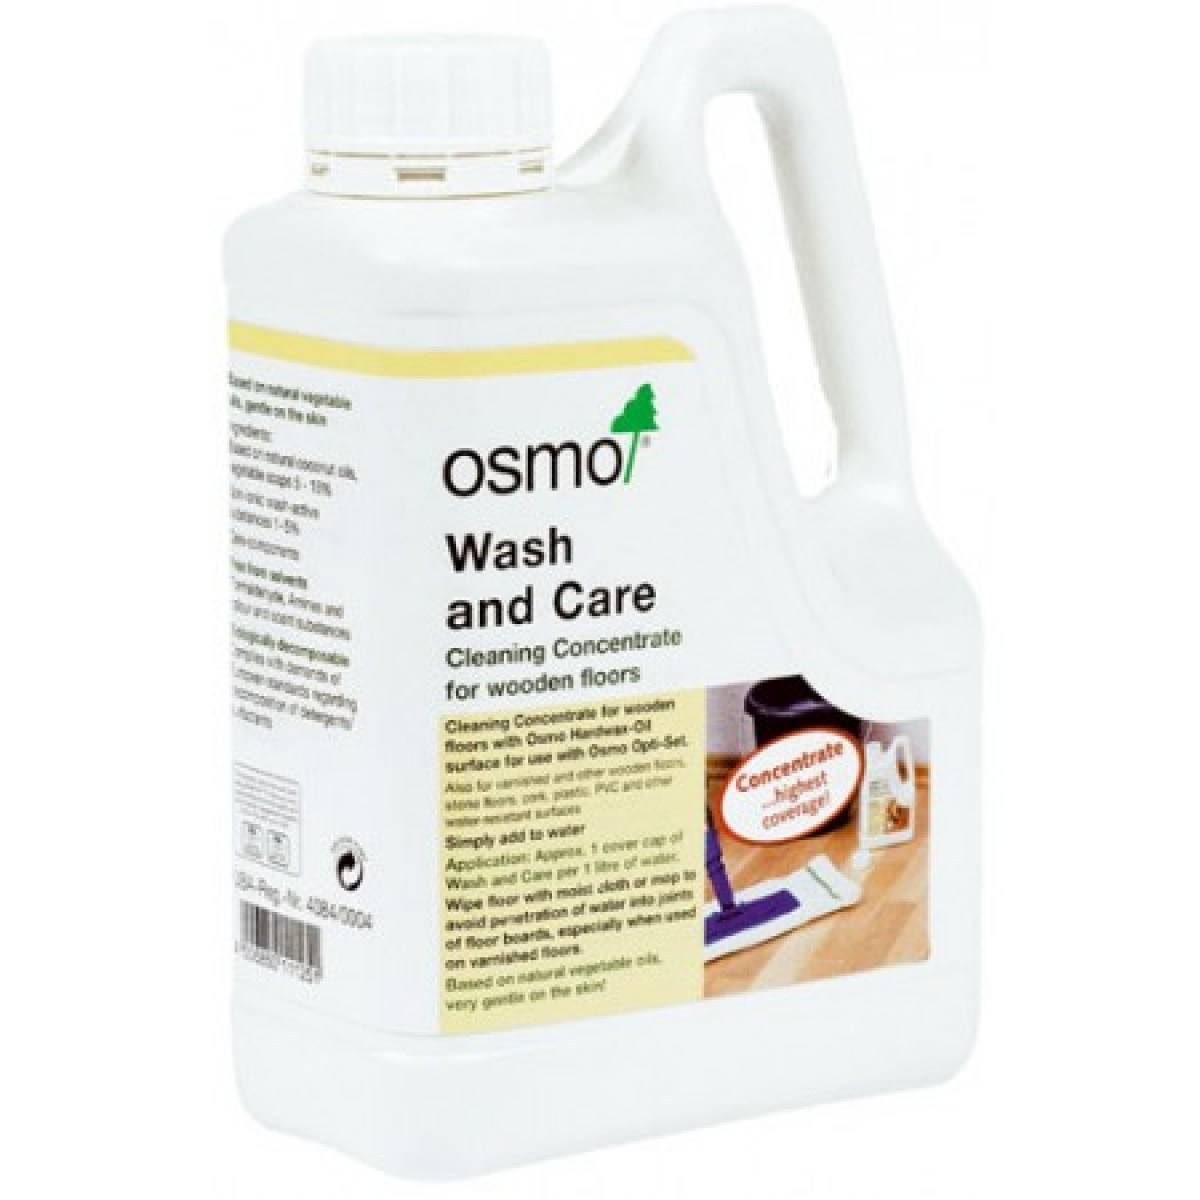 hardwood floor care products review of osmo wash care cleaner 5l cleaning with osmo wash care cleaner 5l cleaning